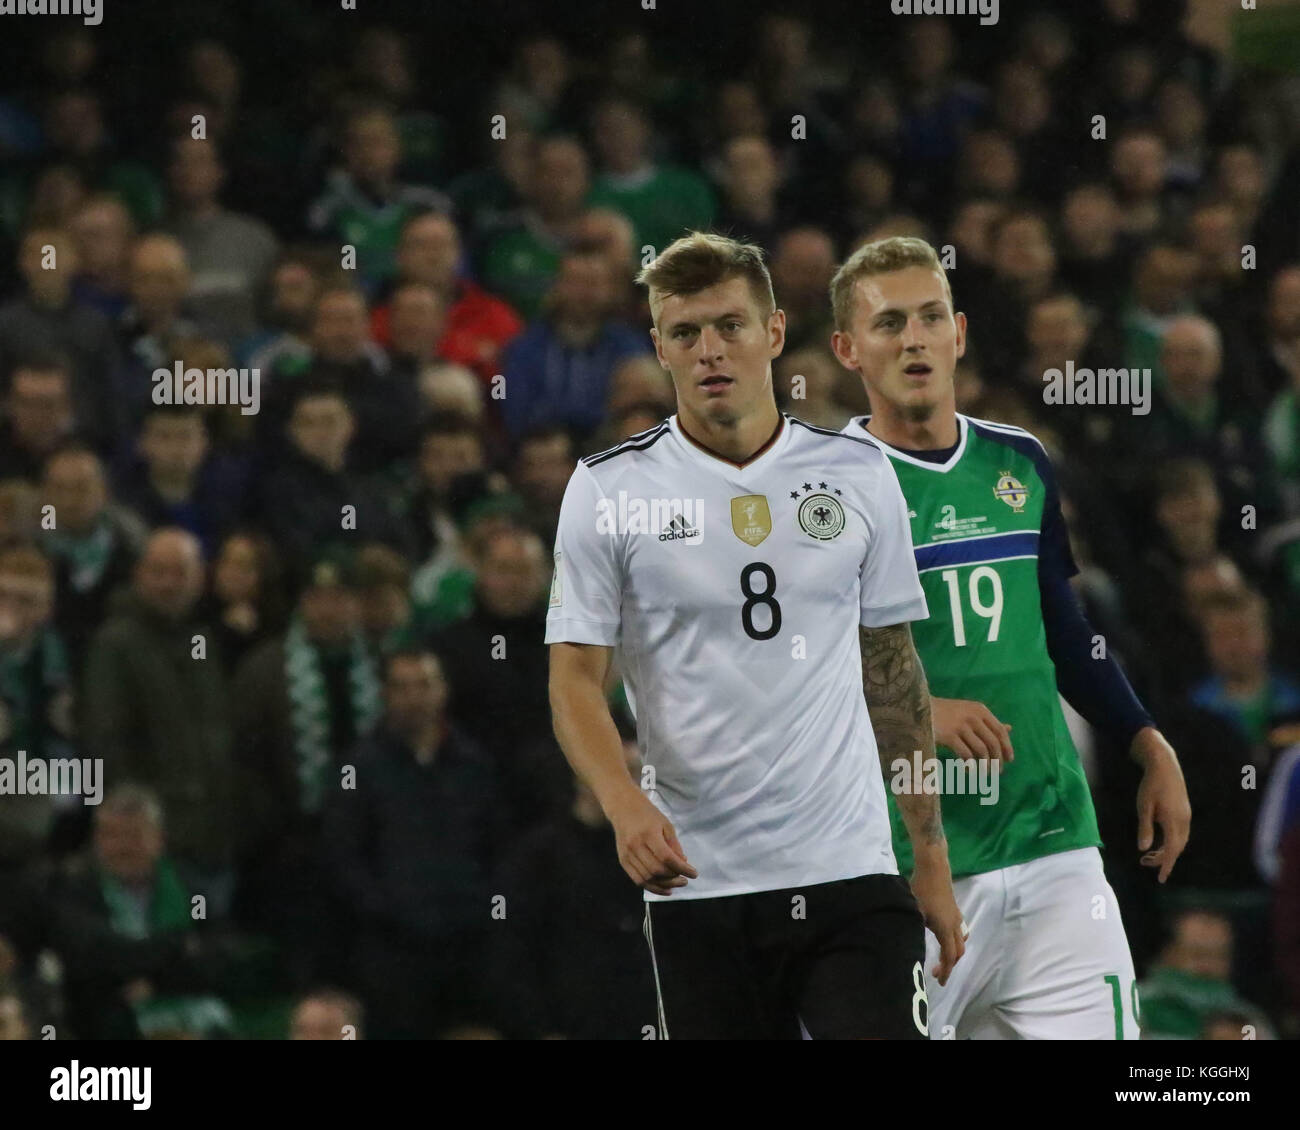 Germany's Toni Kroos (8) in action against Northern Ireland at Windsor Park in Belfast 05 October 2017. Stock Photo